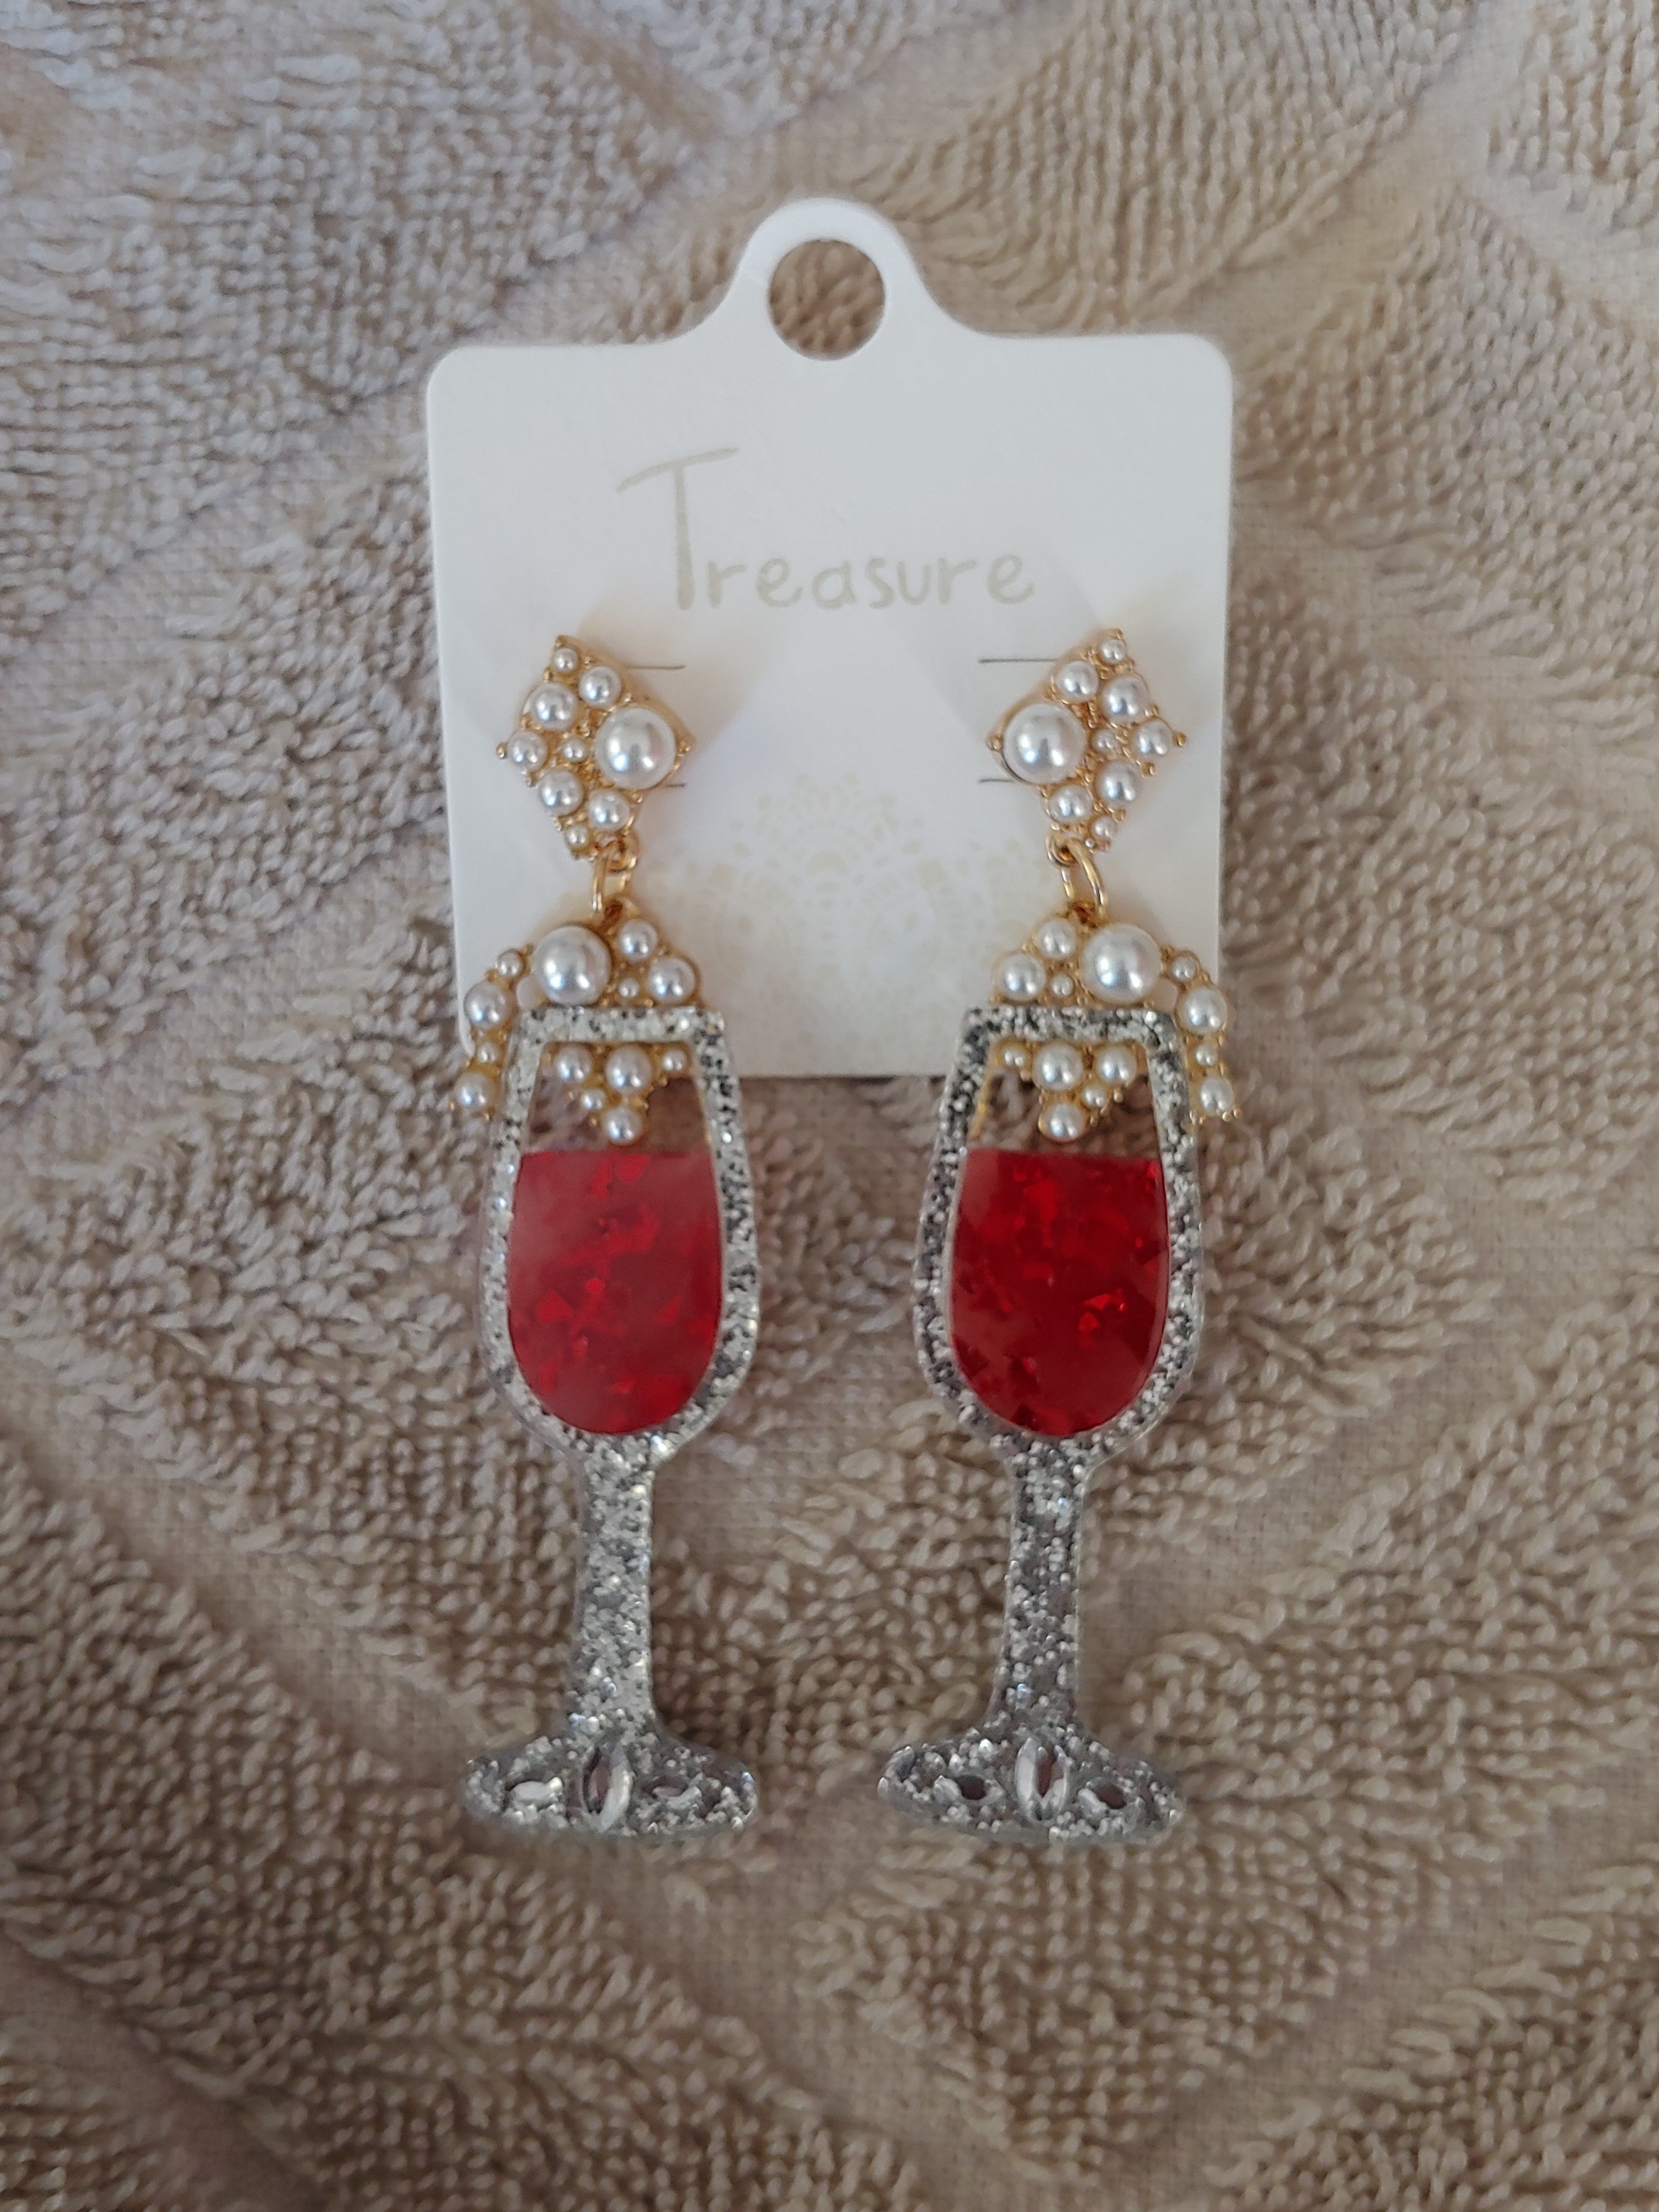 Red with Bubbles Champagne-Glass Earrings: If you are going to a New Year's get-together, these are the perfect earrings! These are a great addition for a party or for just when you need a little more bling. What fun!